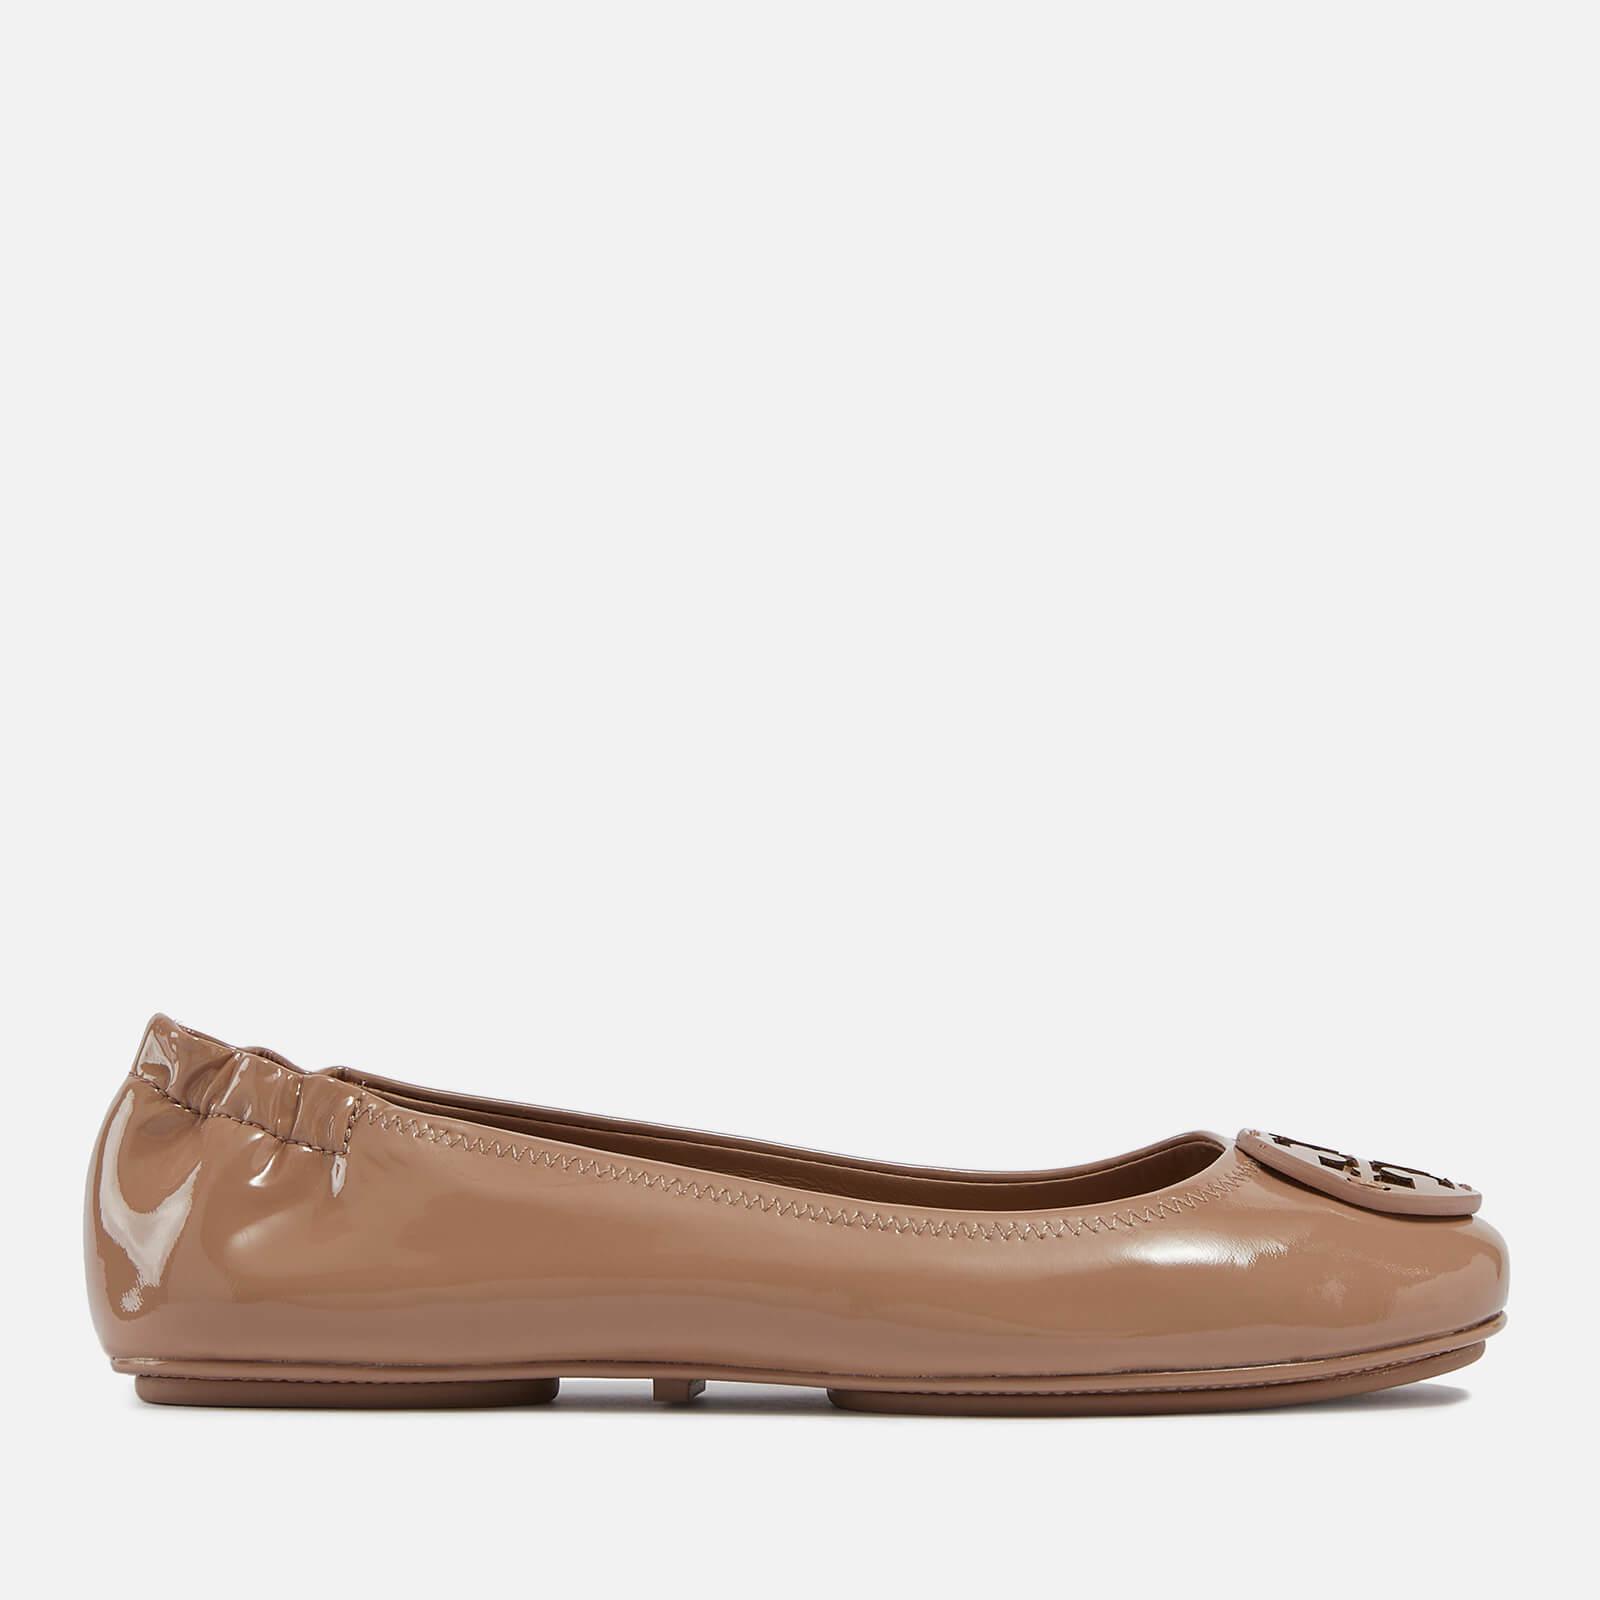 Tory Burch Minnie Patent Leather Travel Ballet Flats in Brown | Lyst